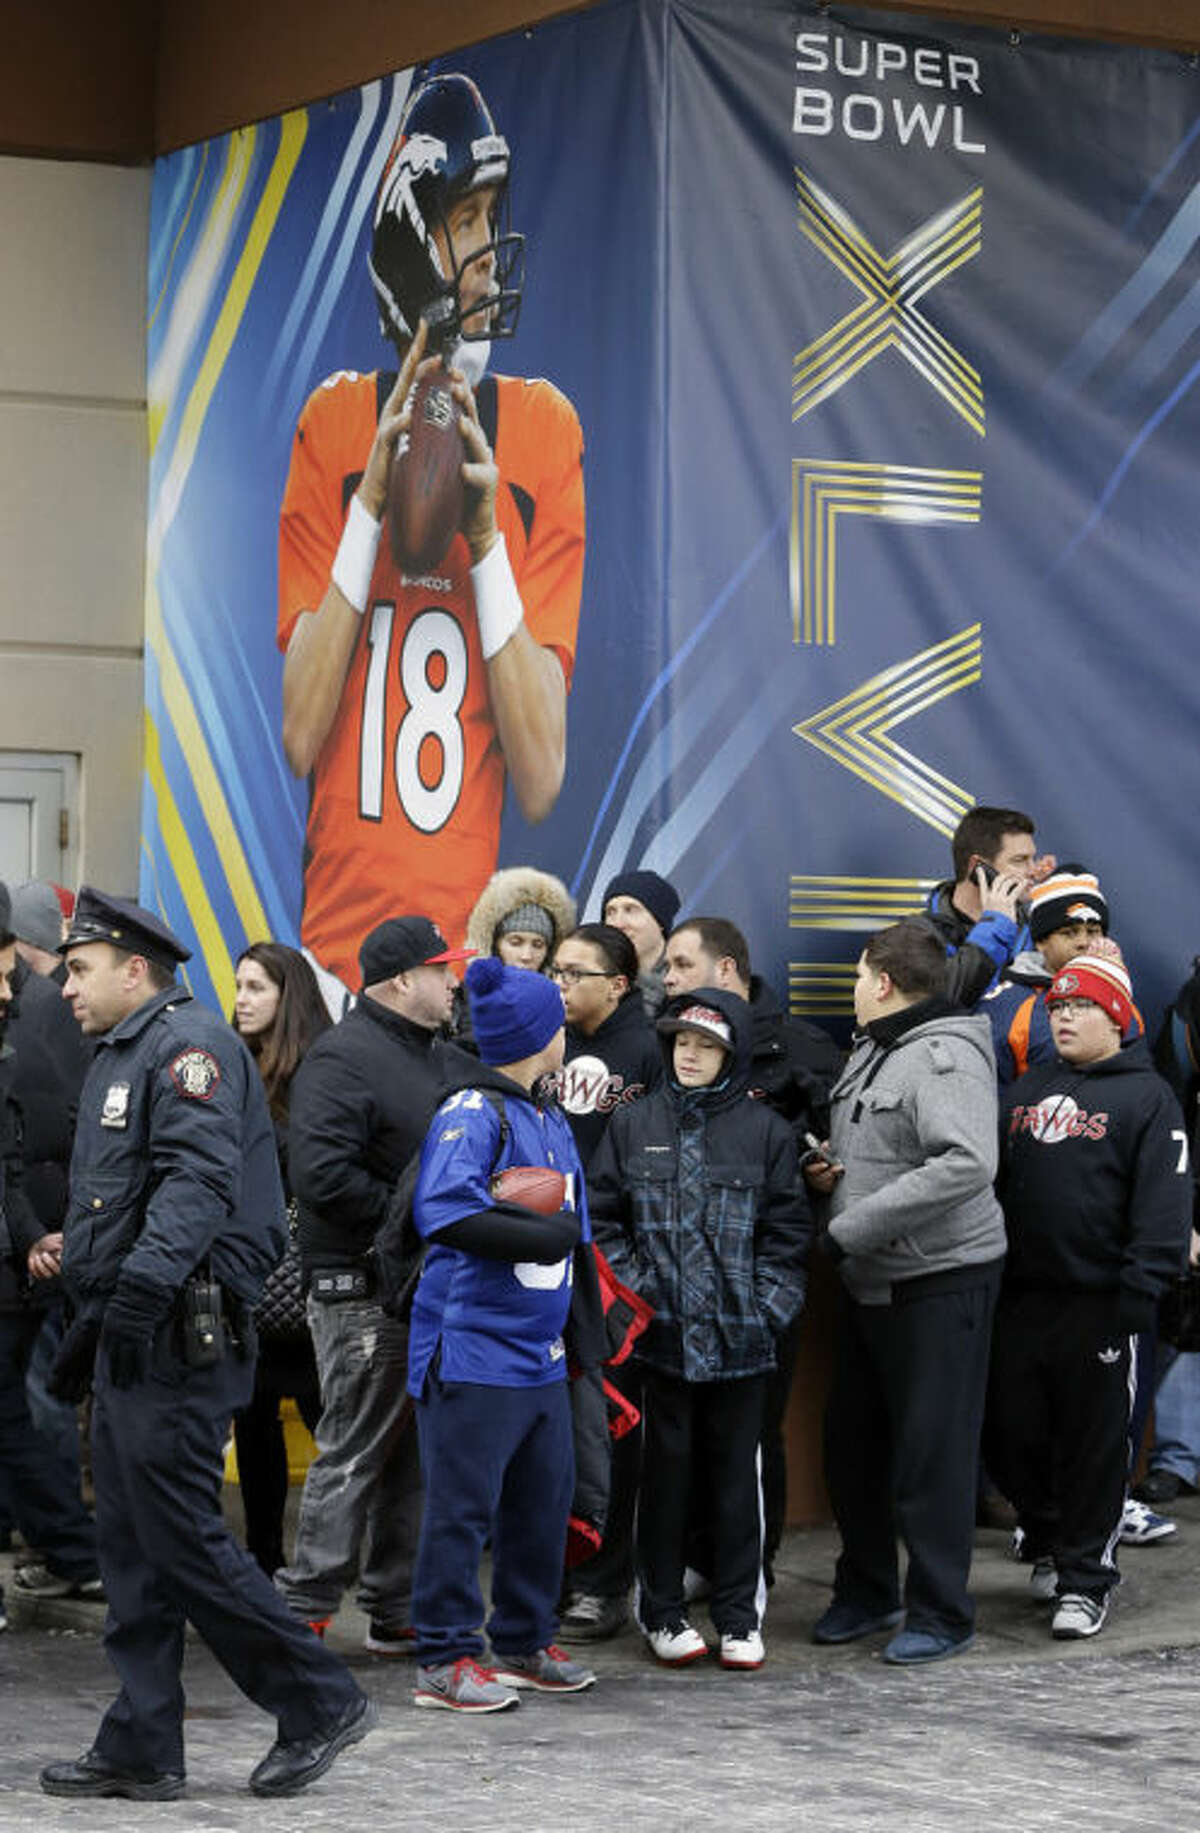 Denver Broncos fans wait for the Broncos' buses to arrive at the team hotel Sunday, Jan. 26, 2014, in Jersey City, N.J. The Broncos are scheduled to play the Seattle Seahawks in the NFL Super Bowl XLVIII football game Sunday, Feb. 2, in East Rutherford, N.J. (AP Photo/Mark Humphrey)